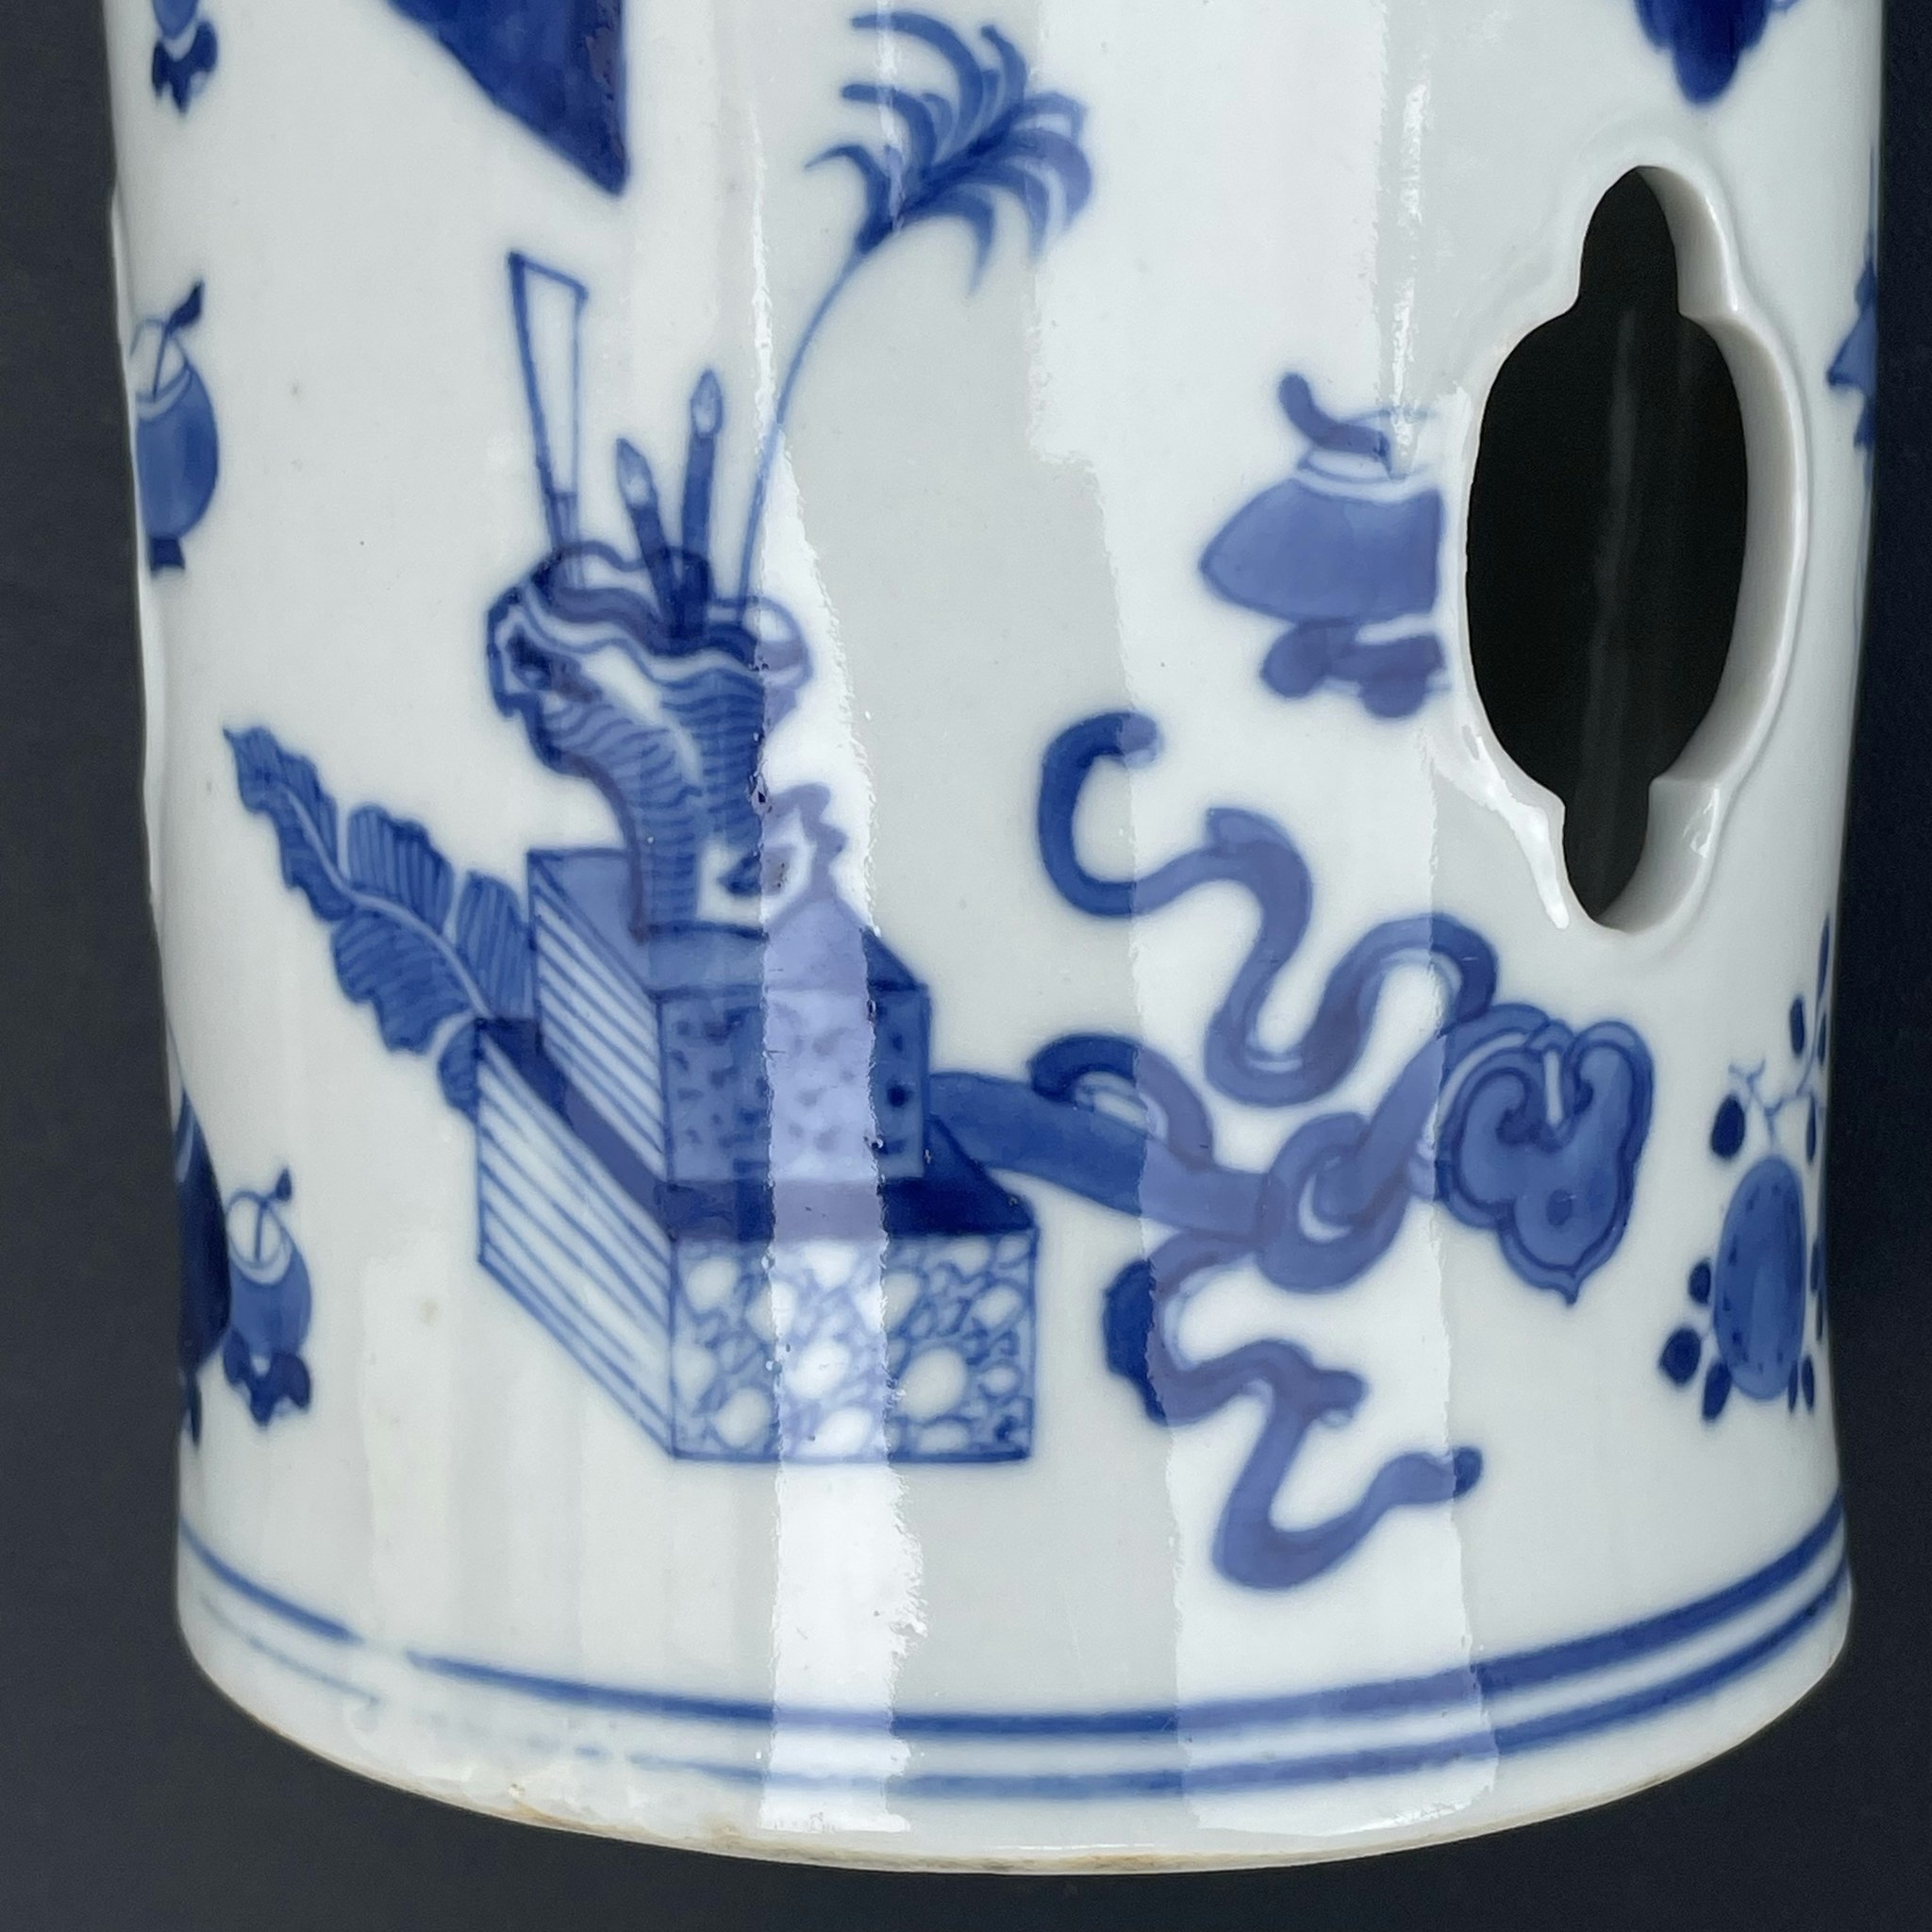 Chinese antique hatstand in blue and white, 19th c, Qing Dynasty #1922